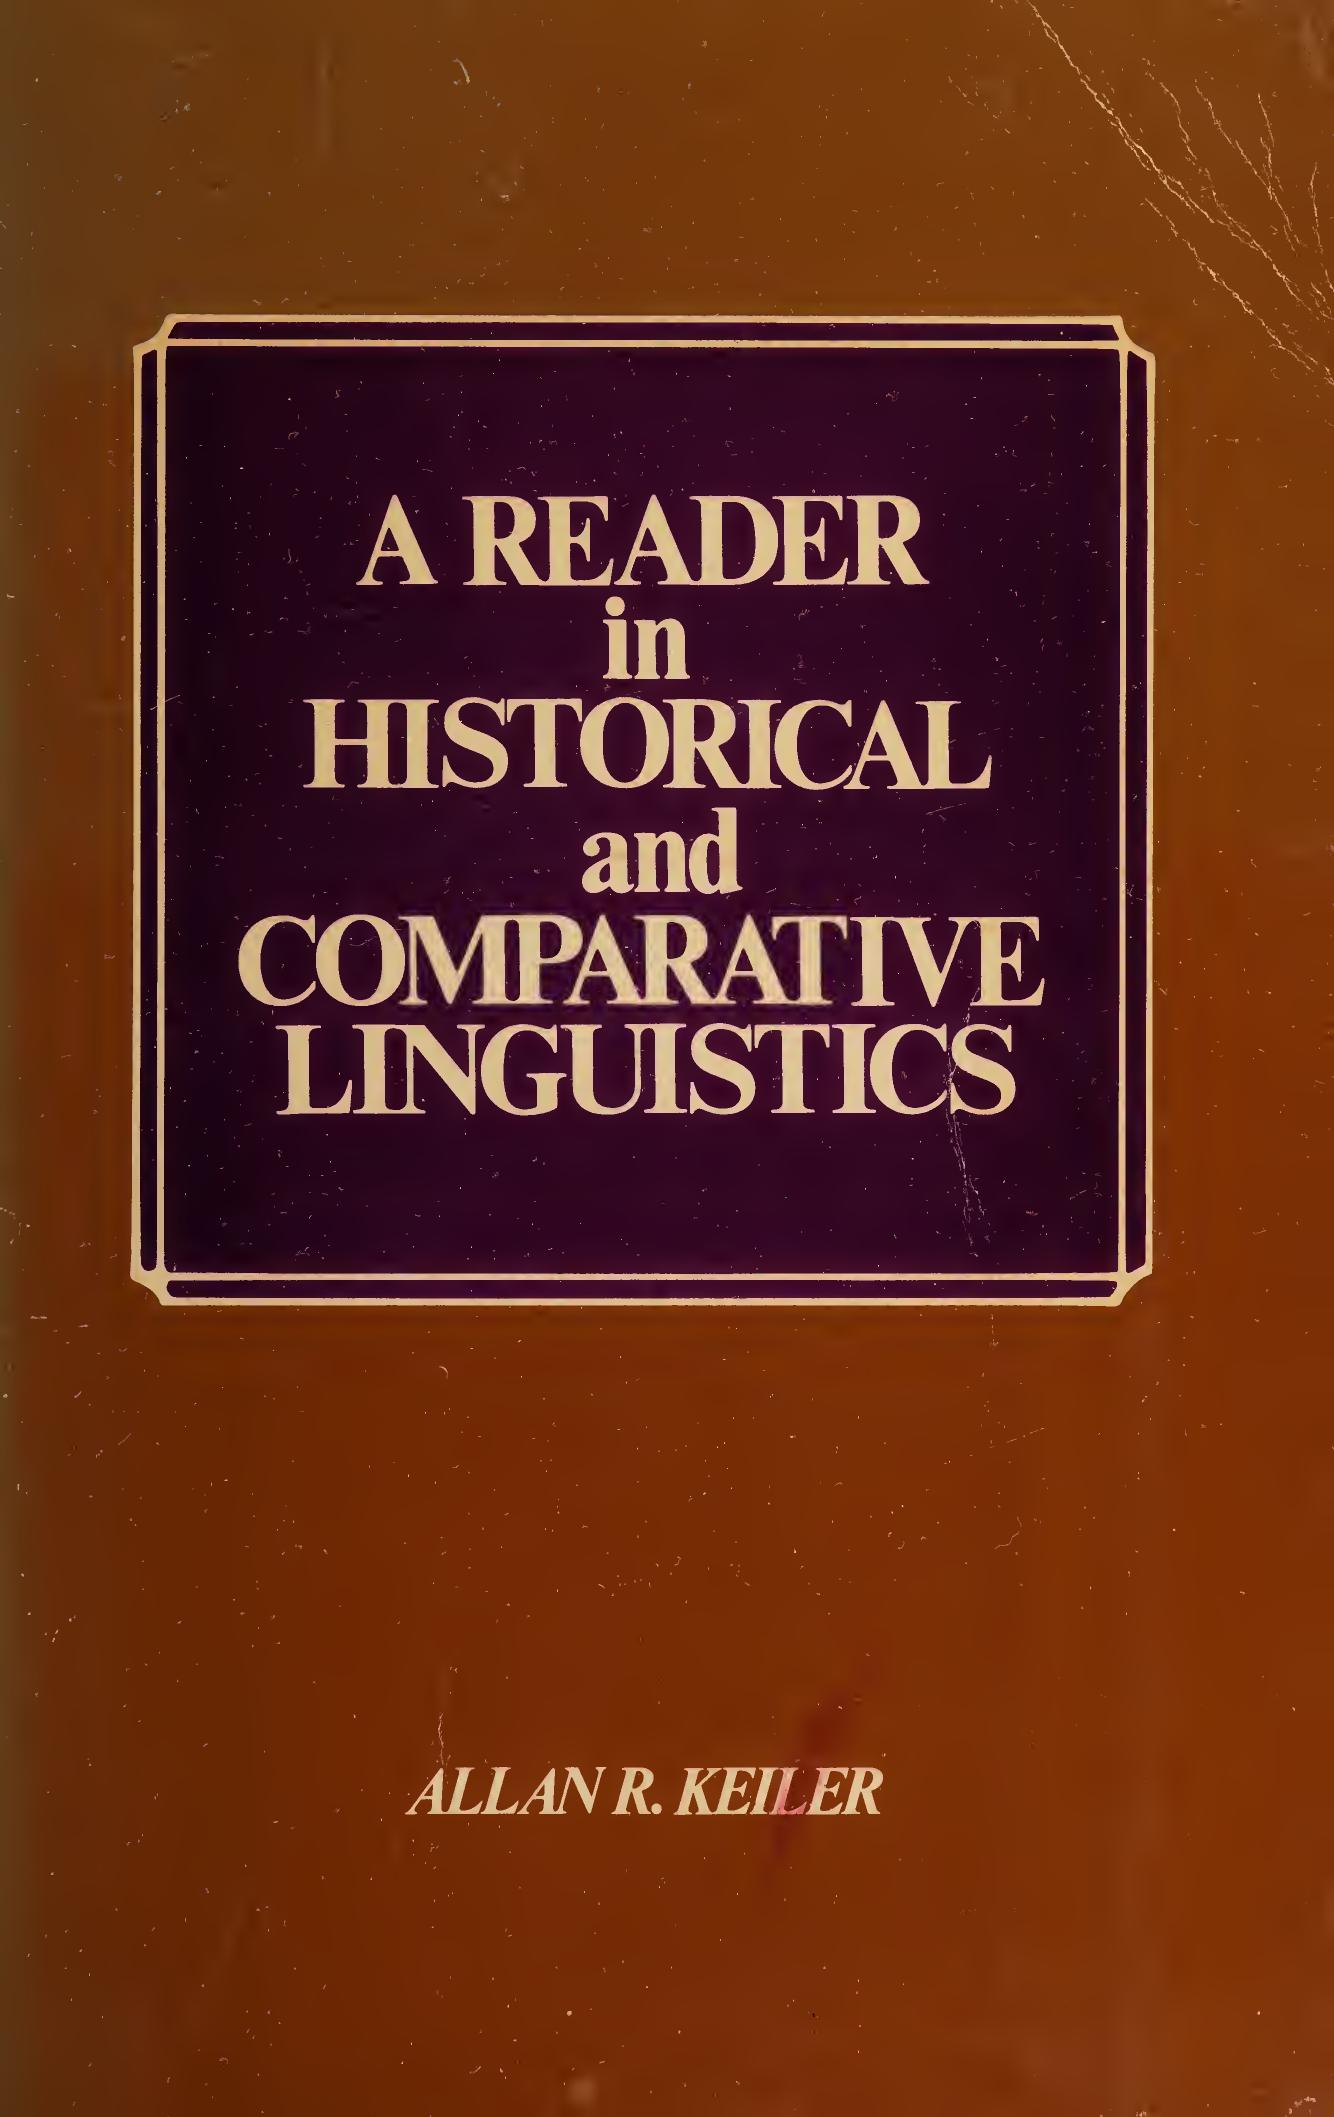 A Reader in Historical and Comparative Linguistics